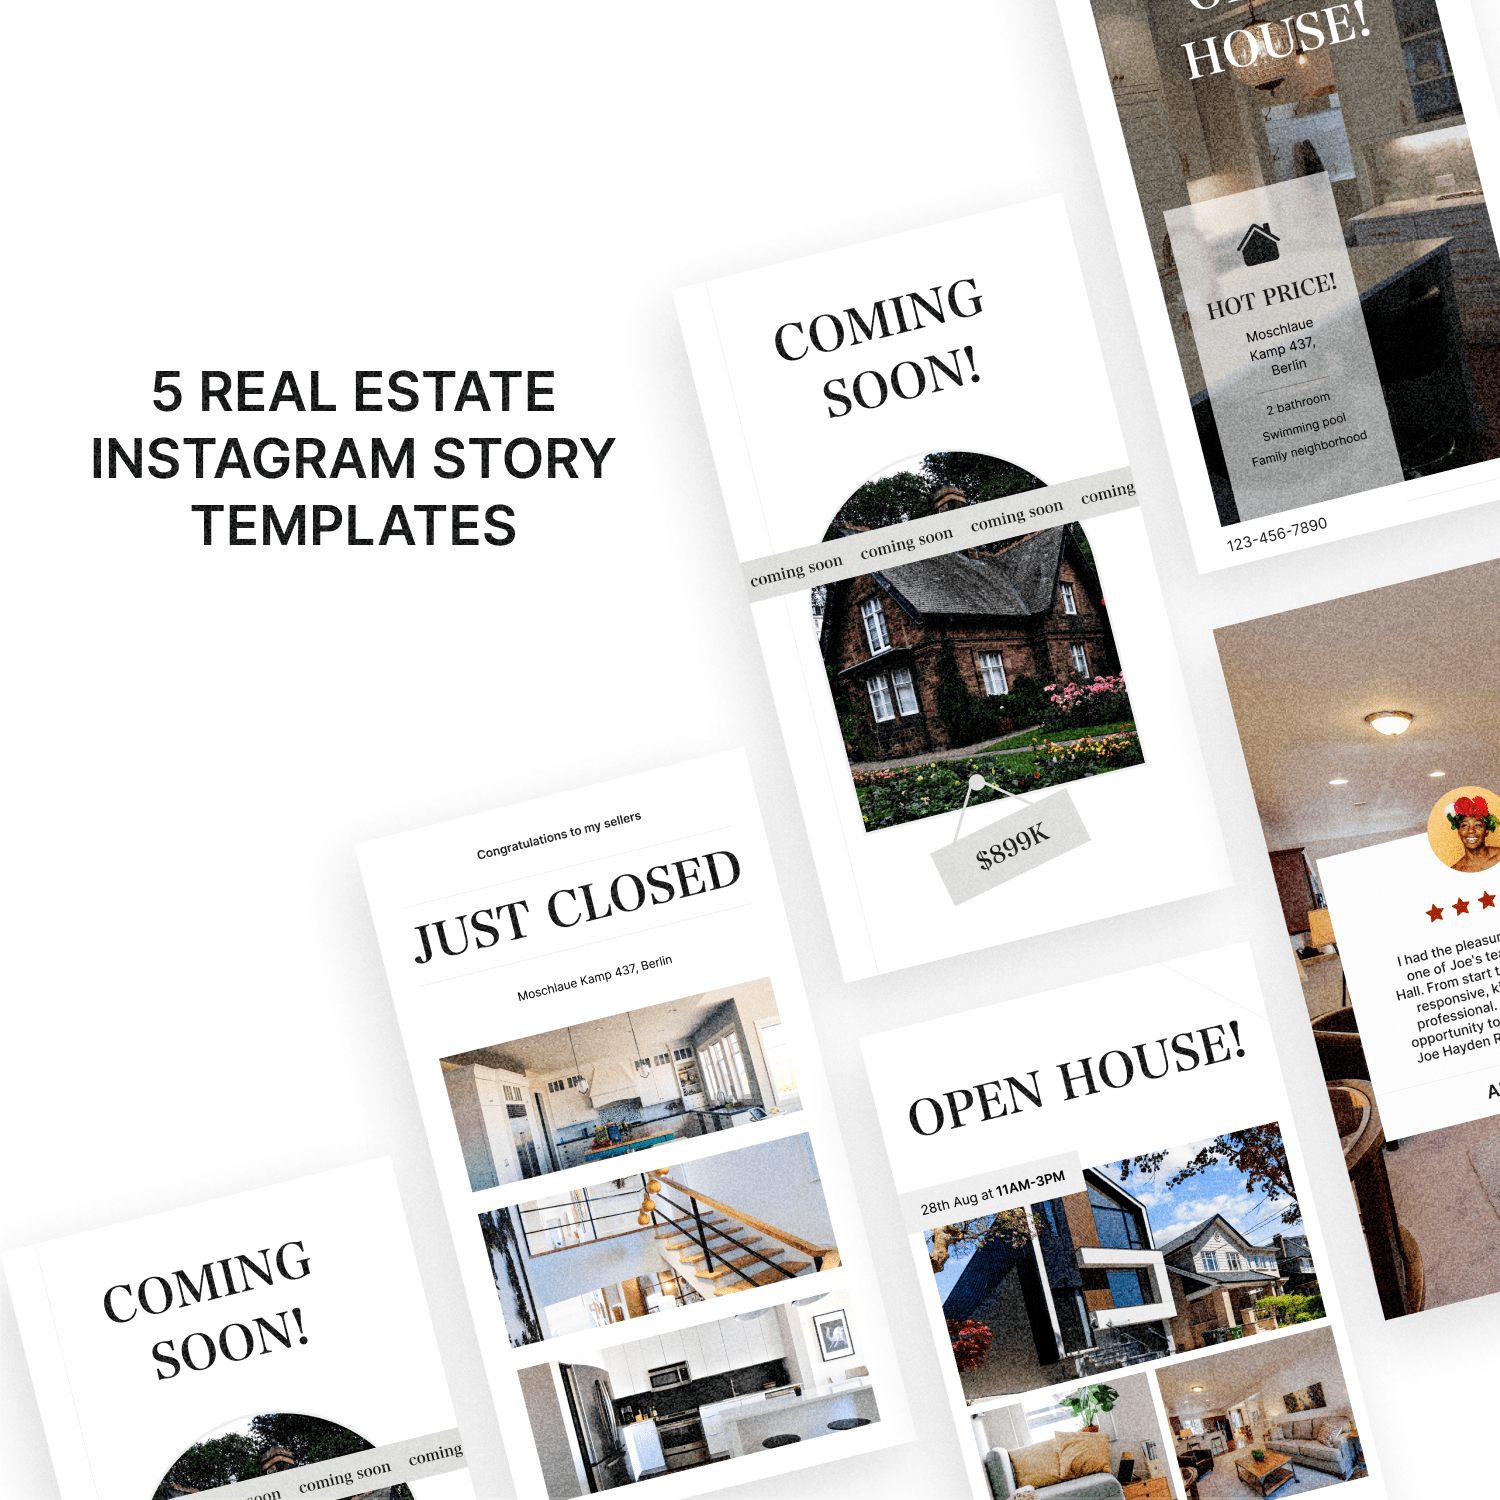 5 real estate instagram Story templates.